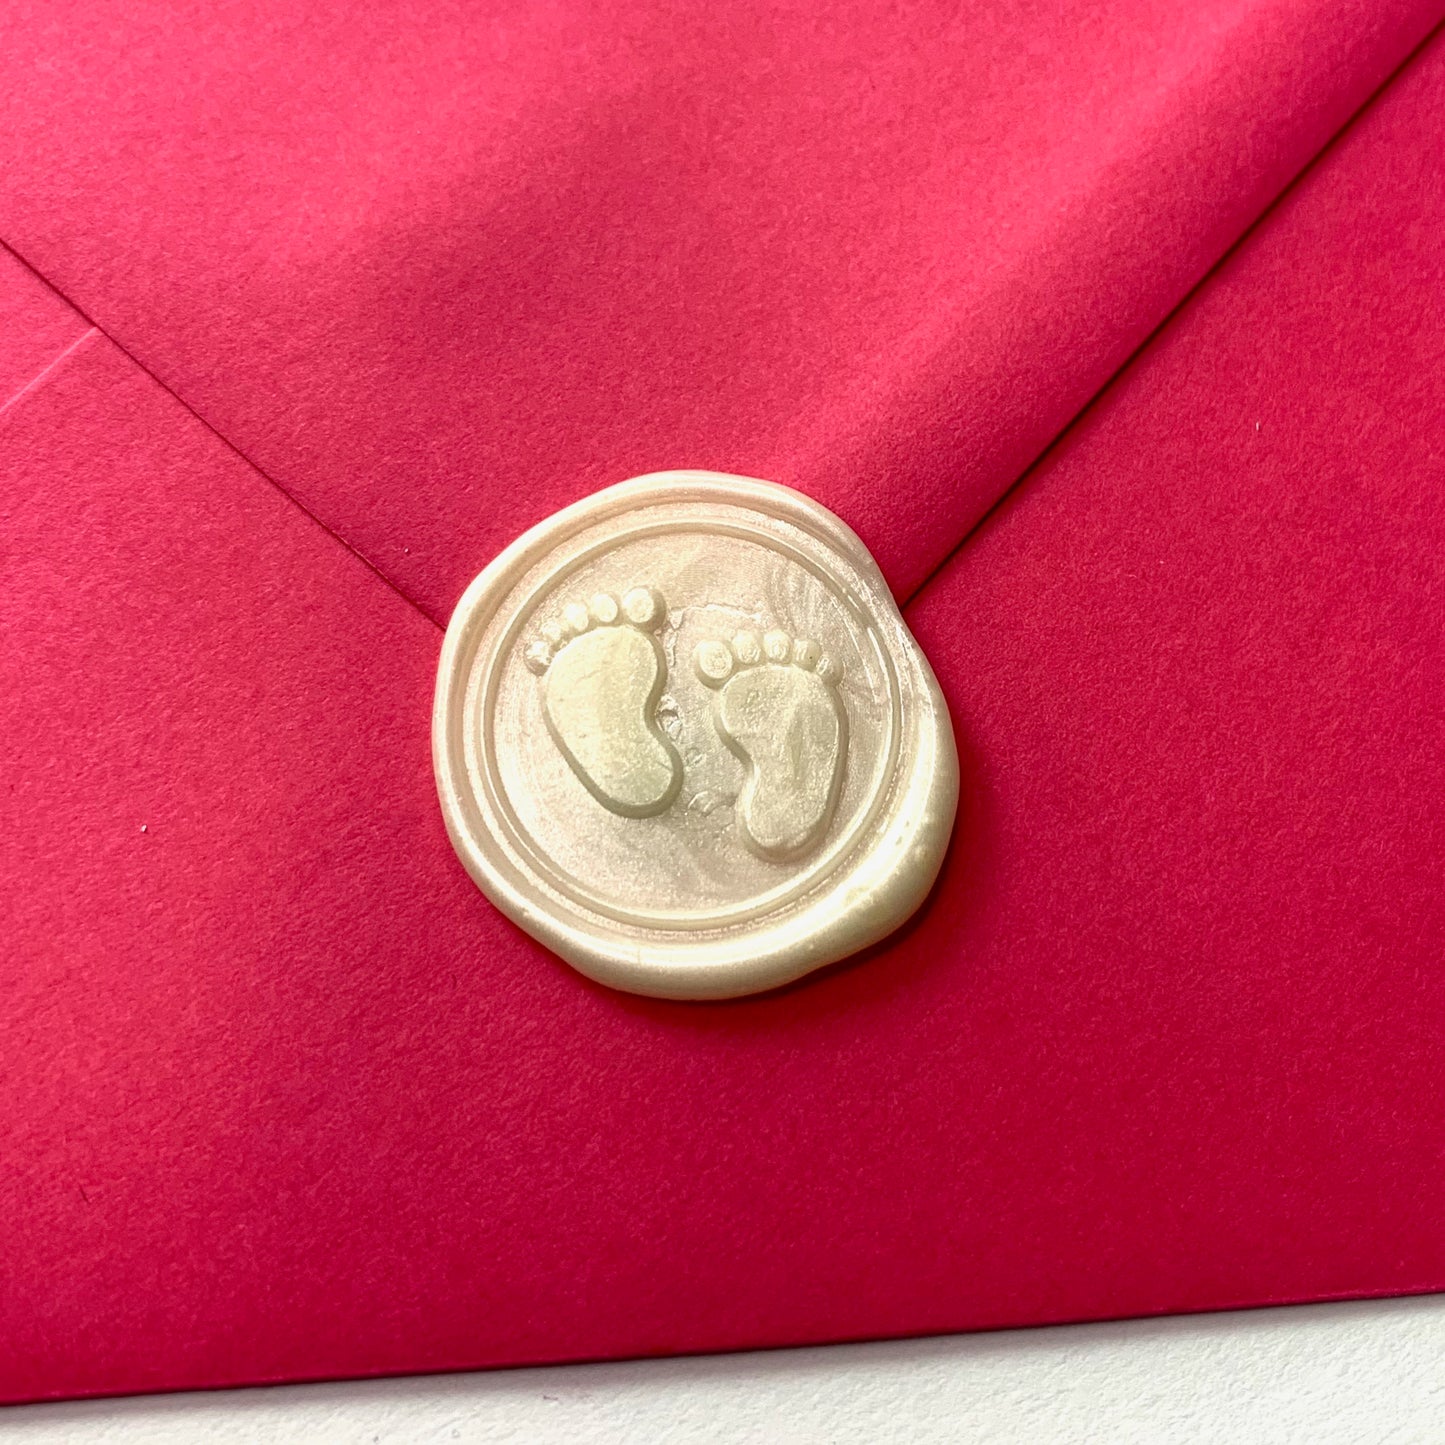 white wax seal on bright pink envelope wax has baby toes and feet design